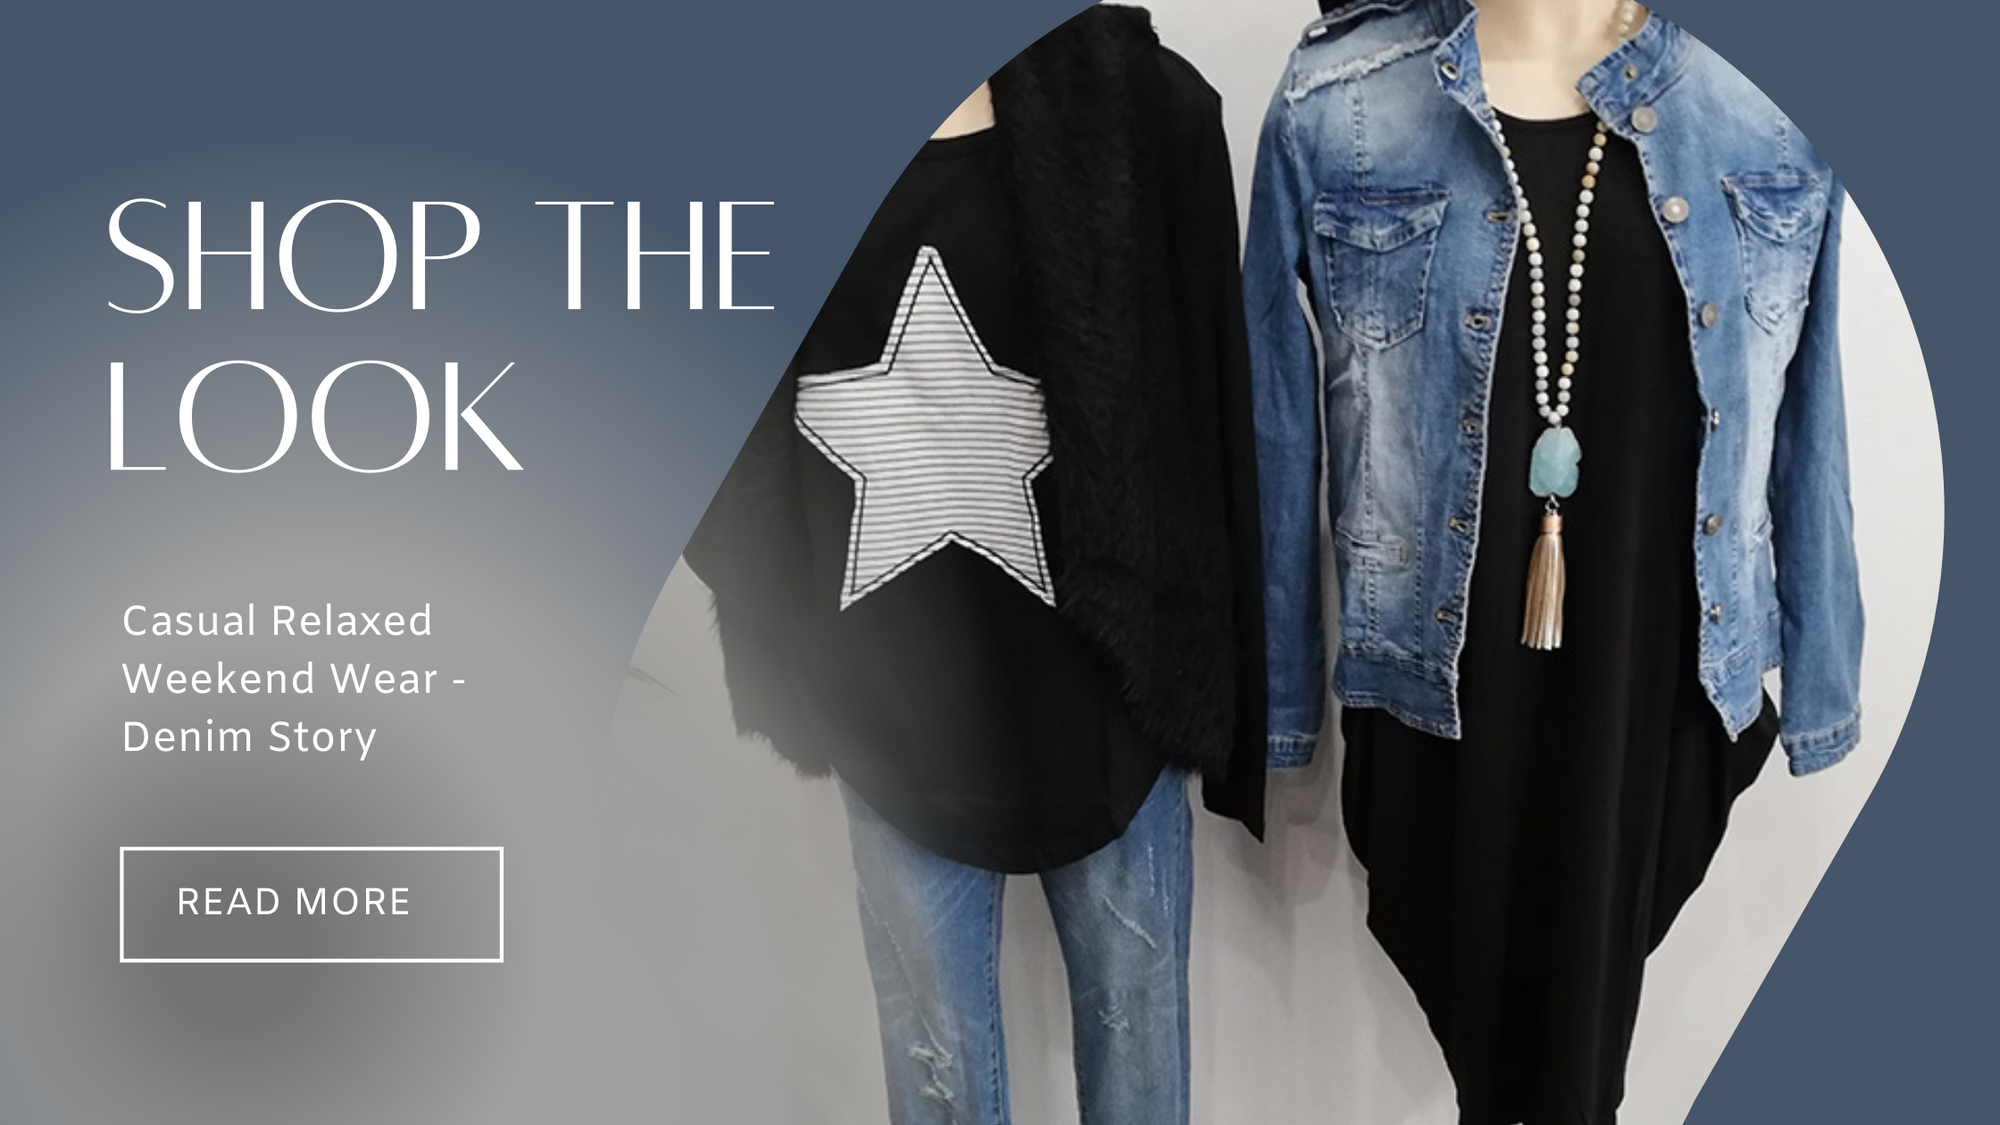 Shop the Look at Kindred Spirit Boutique and Gift